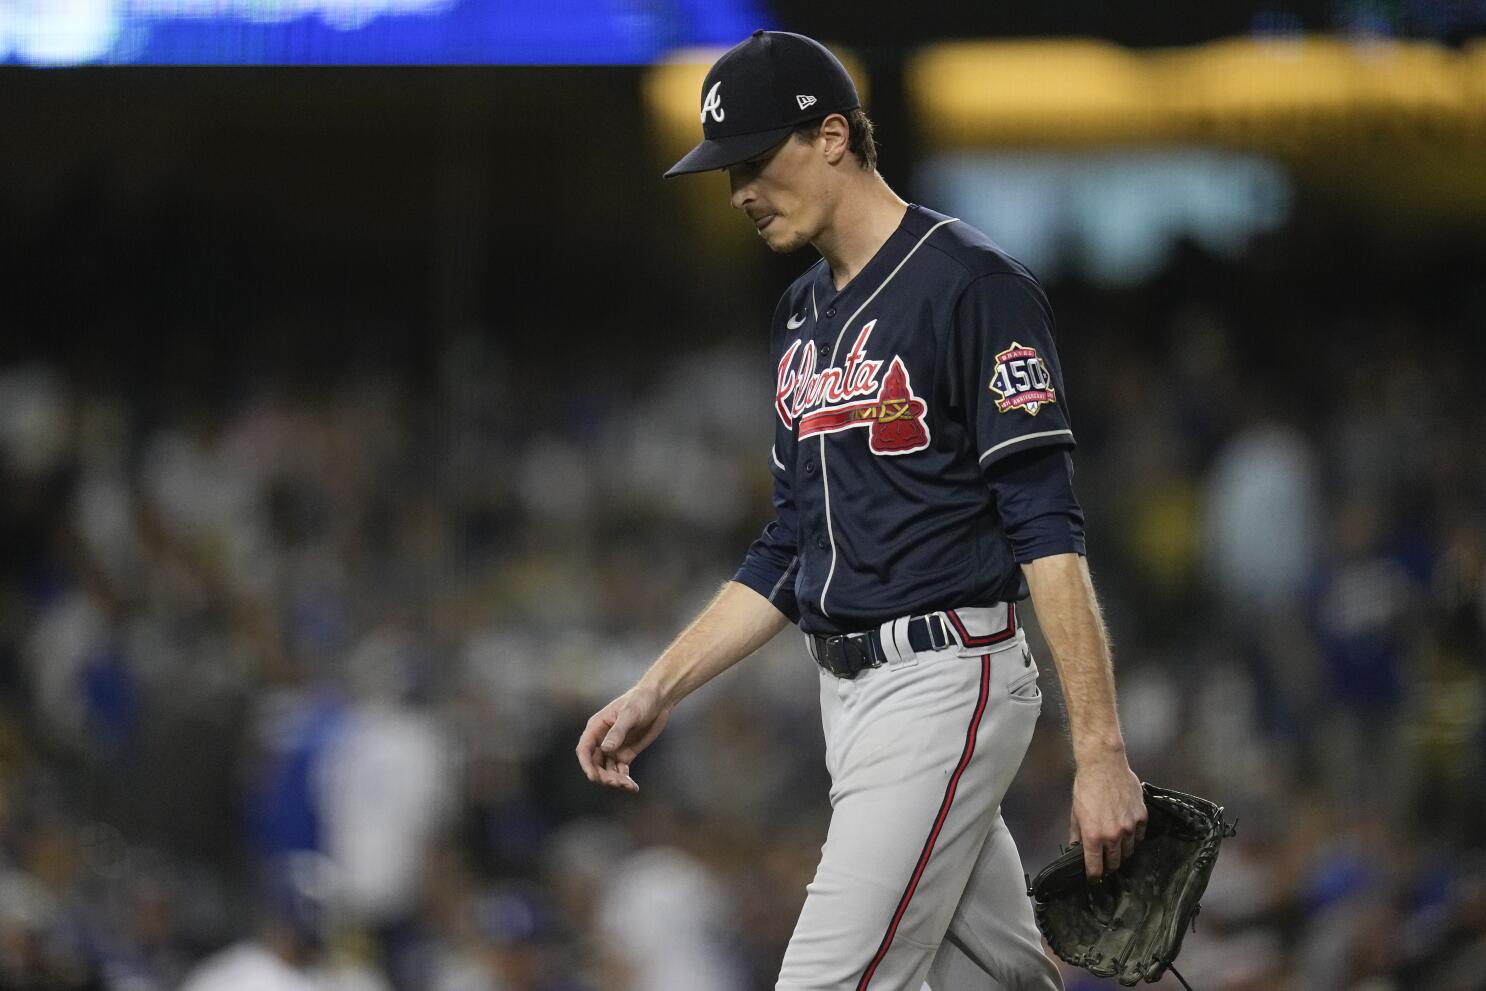 With pitchers fried, Braves' Fried tries to win World Series